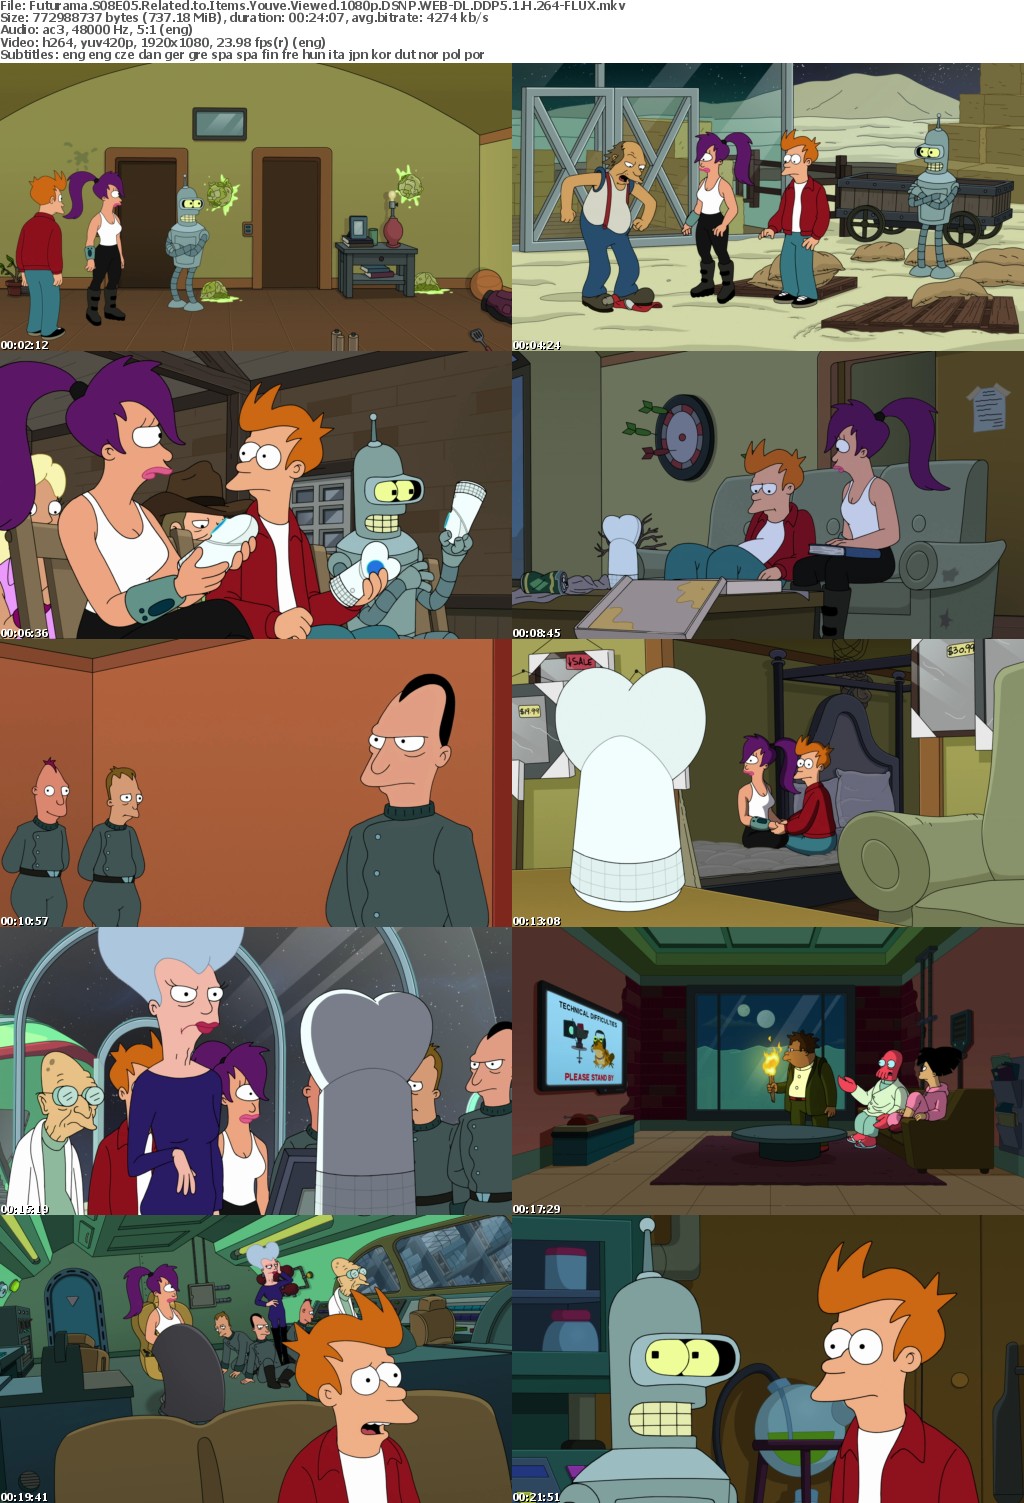 Futurama S08E05 Related to Items Youve Viewed 1080p DSNP WEB-DL DDP5 1 H 264-FLUX